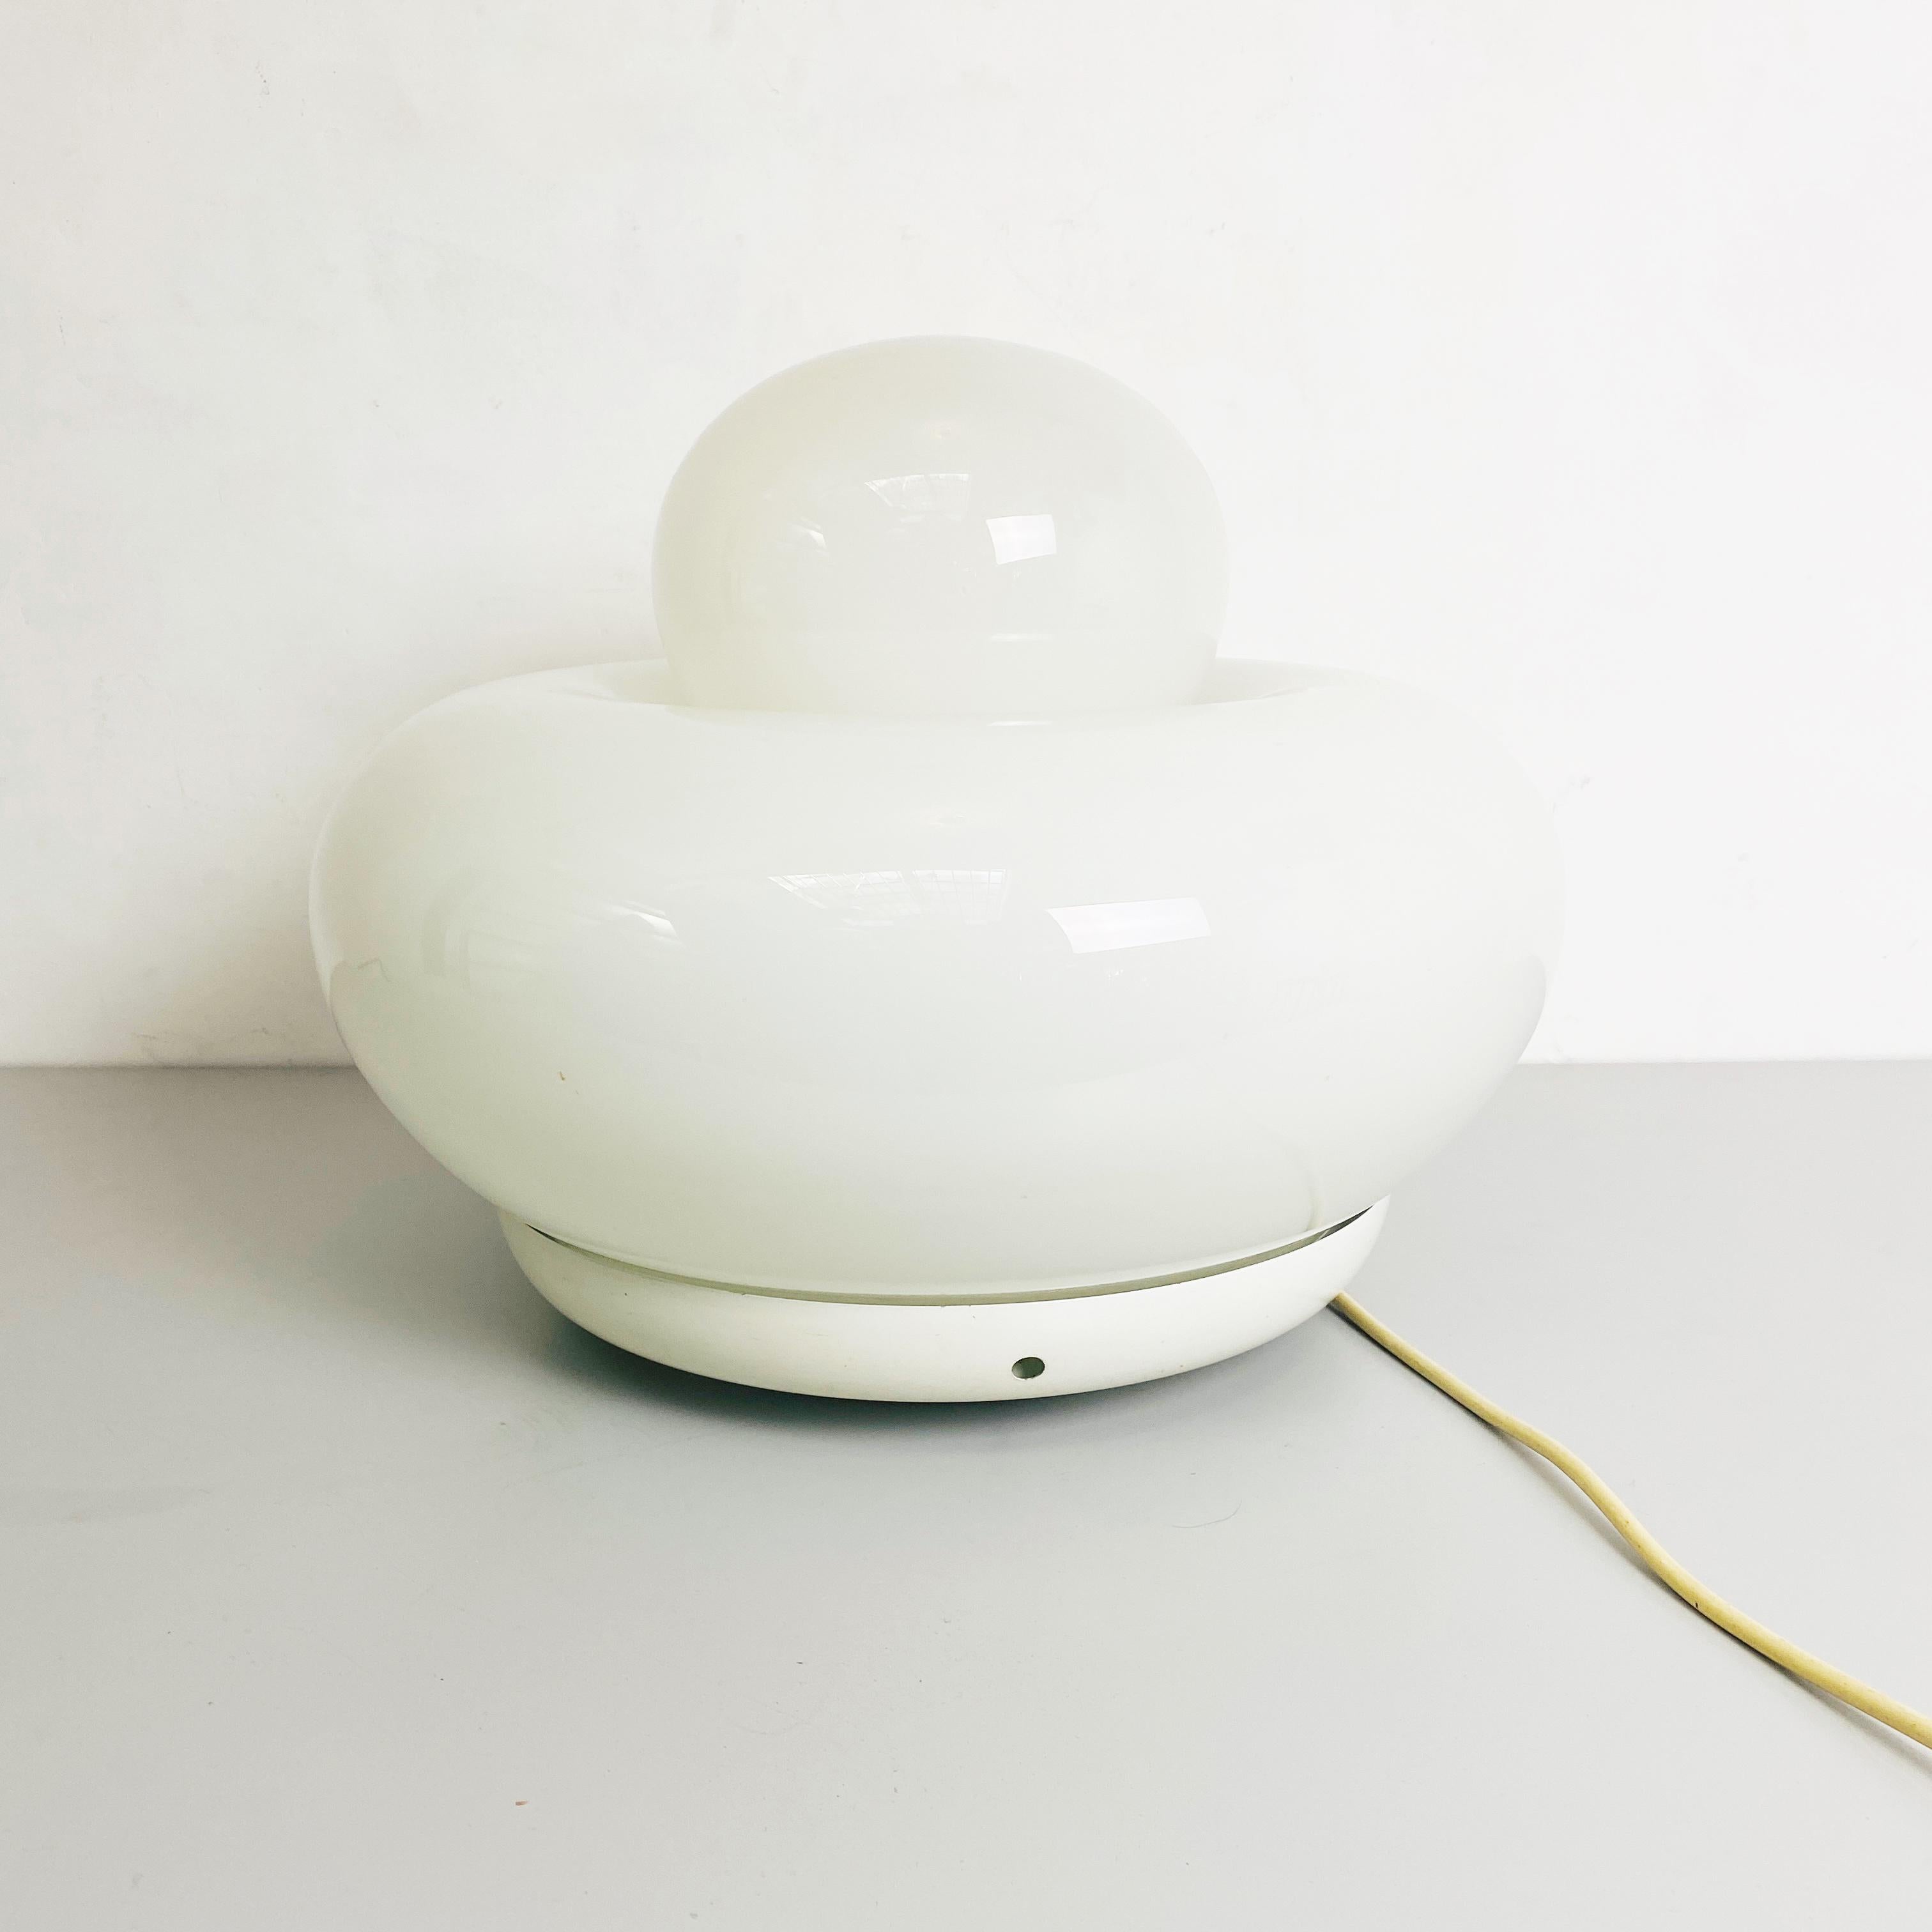 Italian Modern Electra Table Lamp by Giuliana Gramigna for Artemide, 1968 In Good Condition For Sale In MIlano, IT